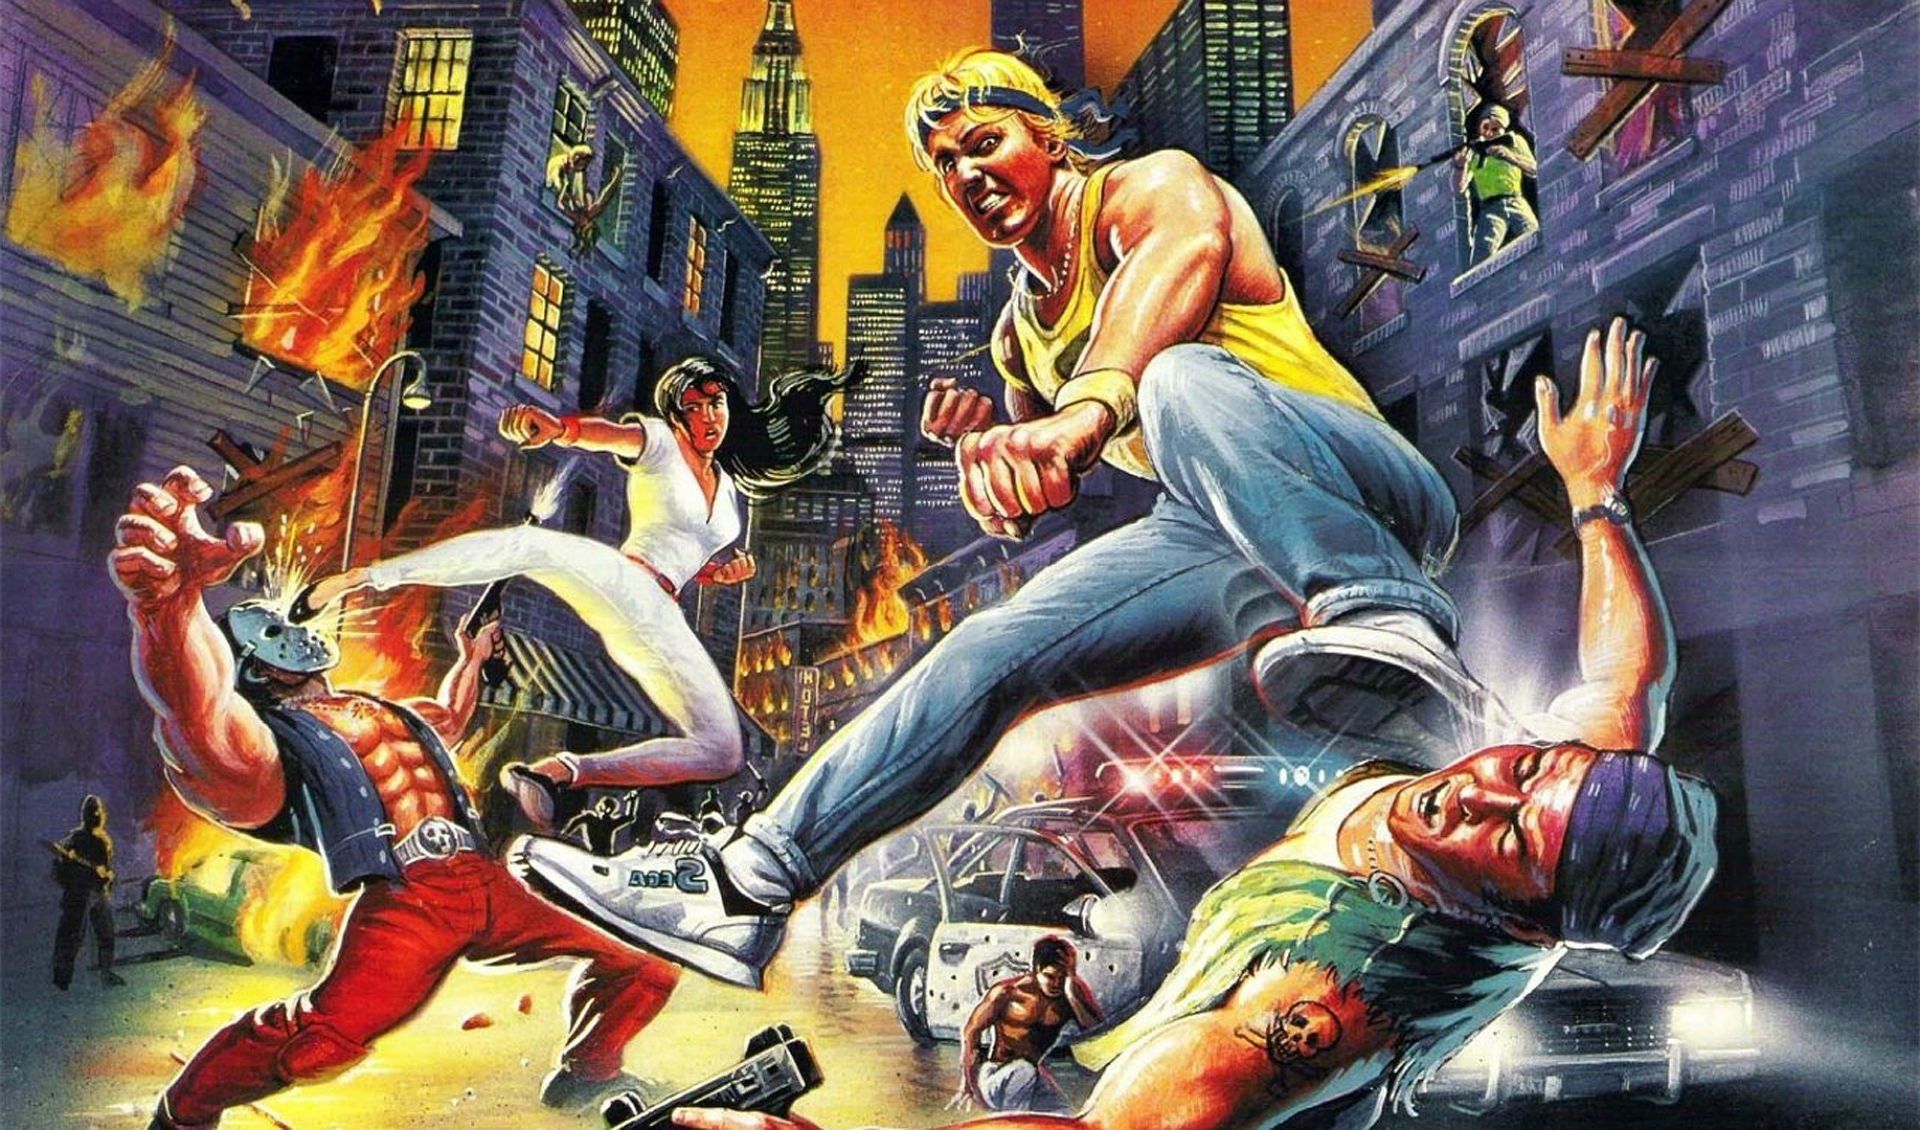 Streets of Rage Wallpaper. Chicago